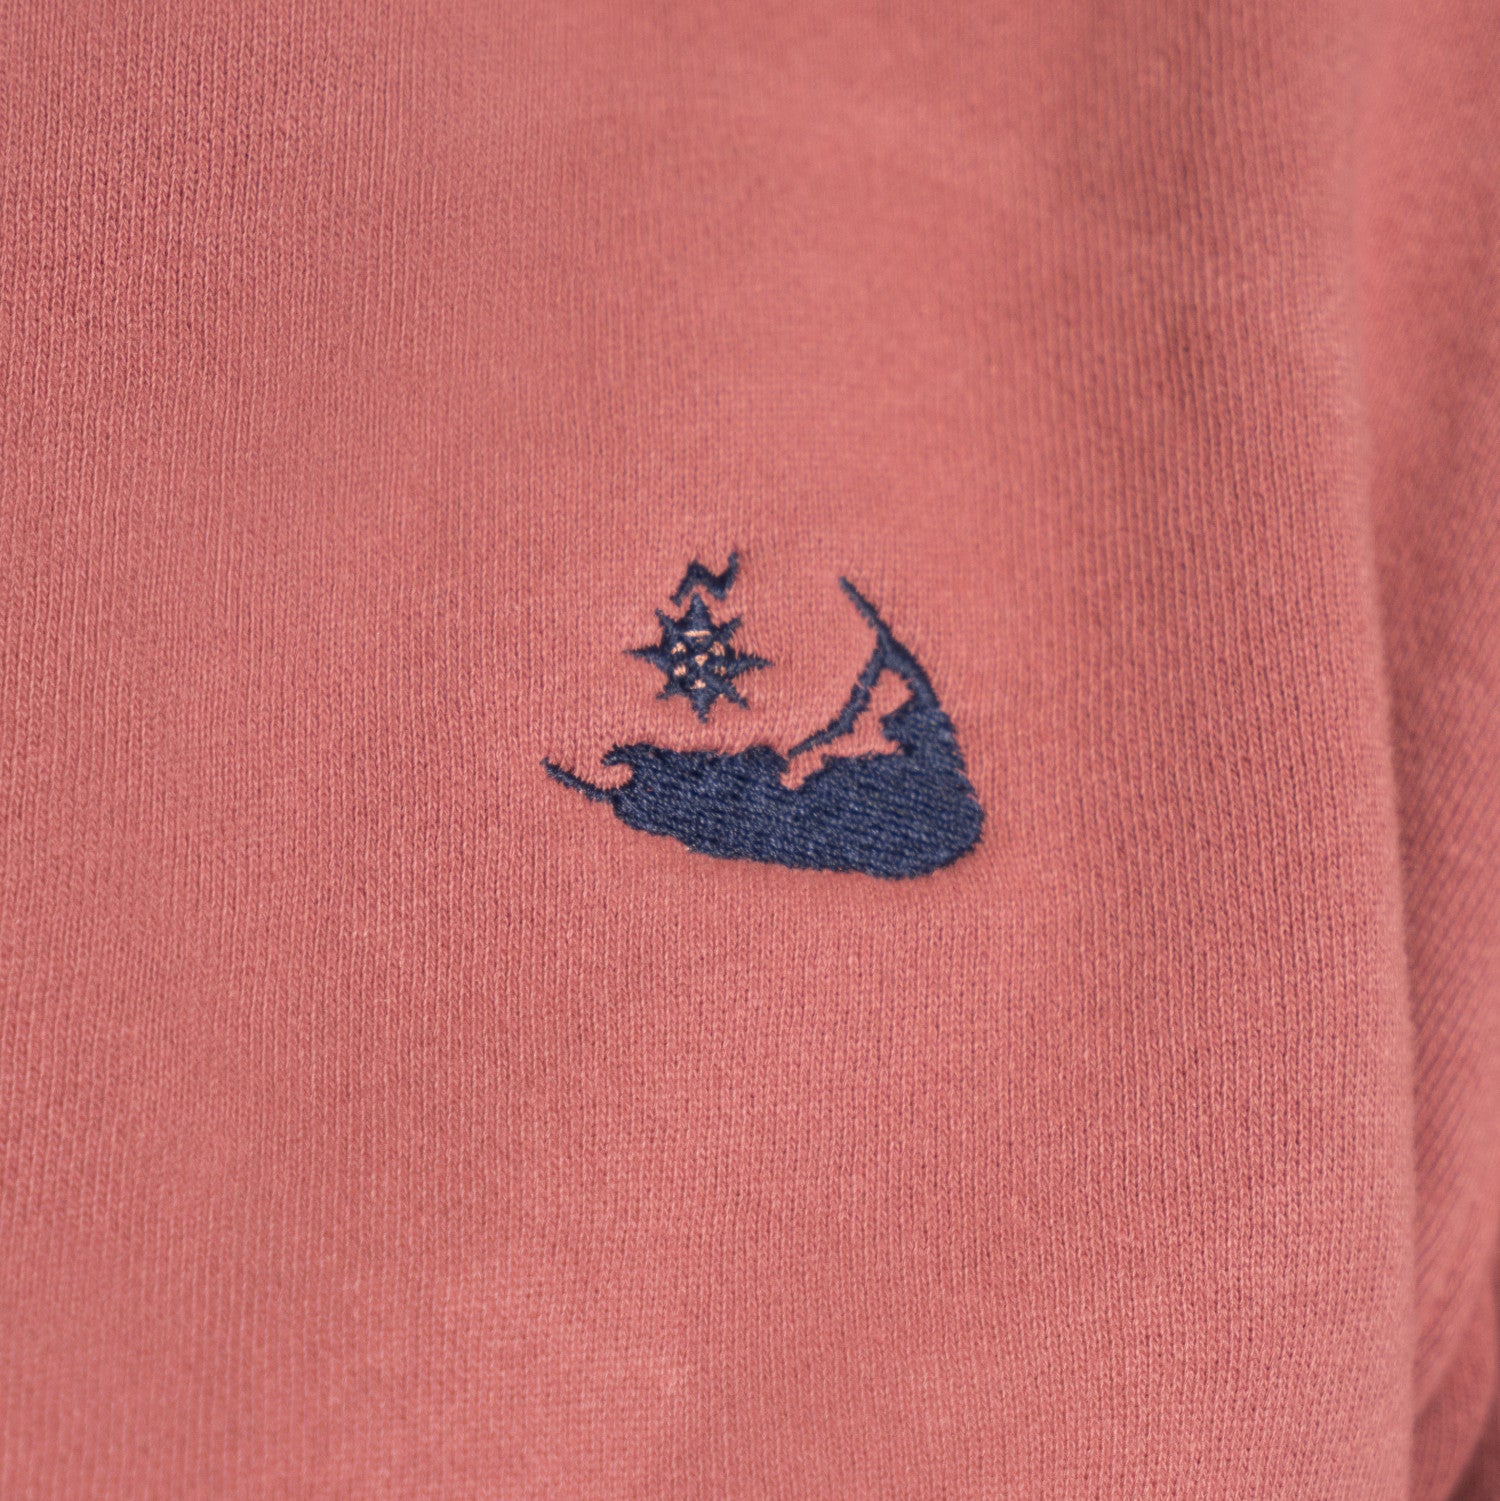 Nantucket Reds Collection™ Sweatshirt - Murray's Toggery Shop